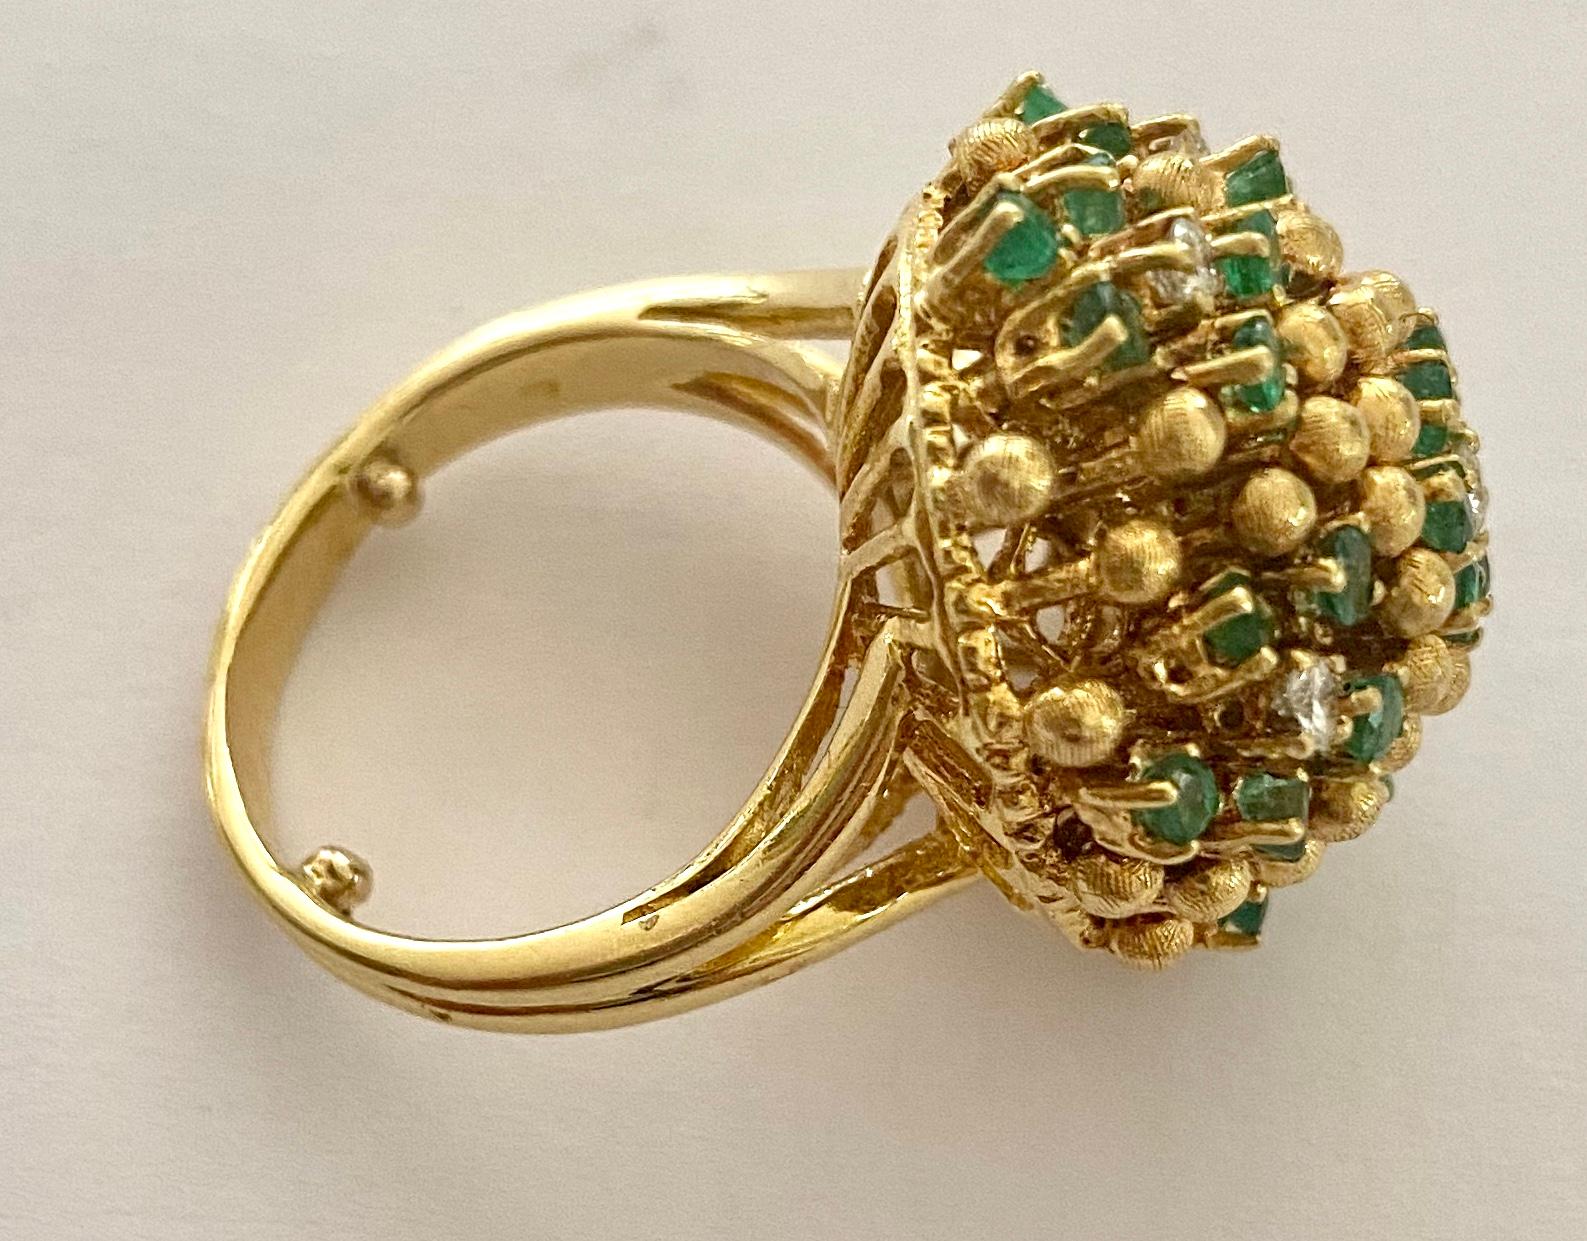 Brilliant Cut One '1' 18 Karat Gold Cocktail Ring Set with Diamonds and Emeralds, Italy, 1960